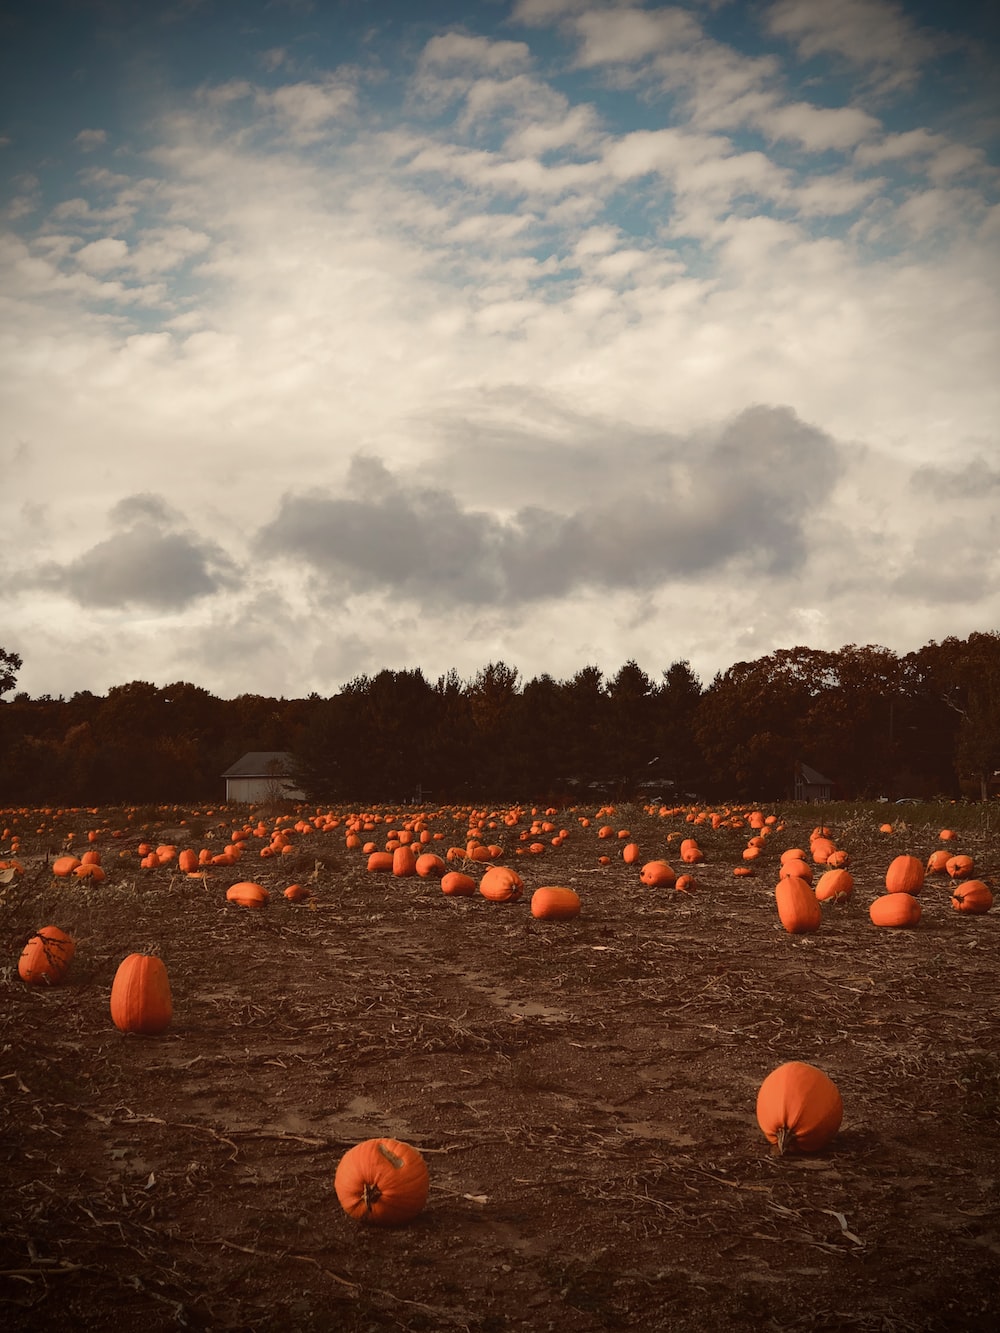 Pumpkin Field Picture. Download Free Image